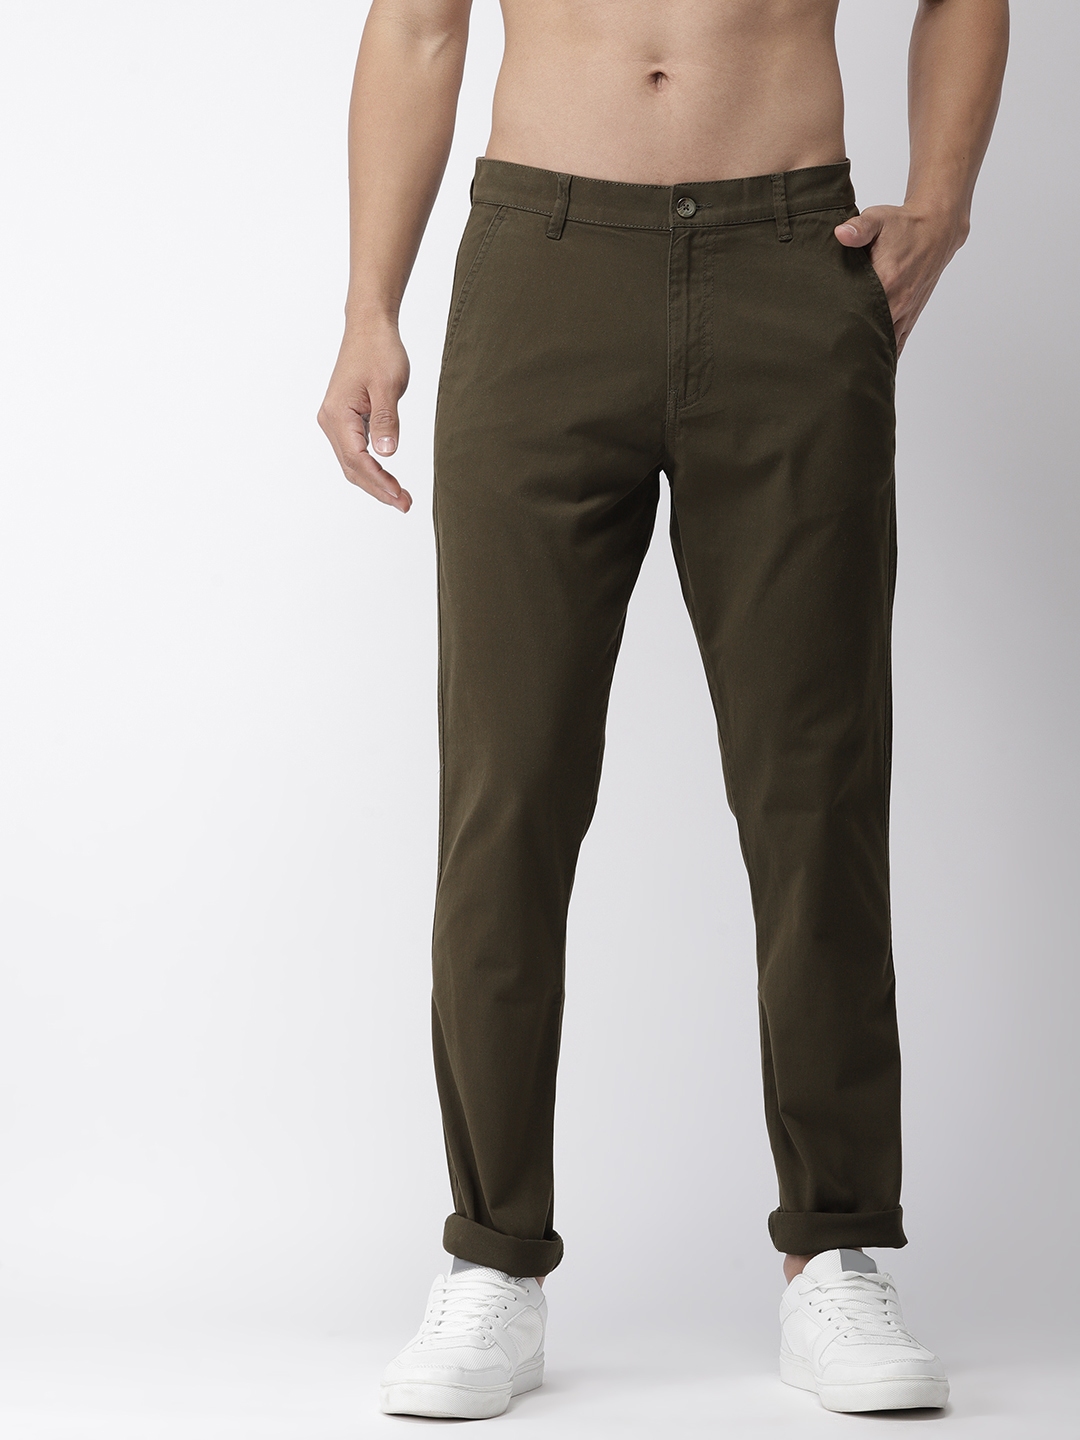 Buy Highlander Trousers online  Men  447 products  FASHIOLAin